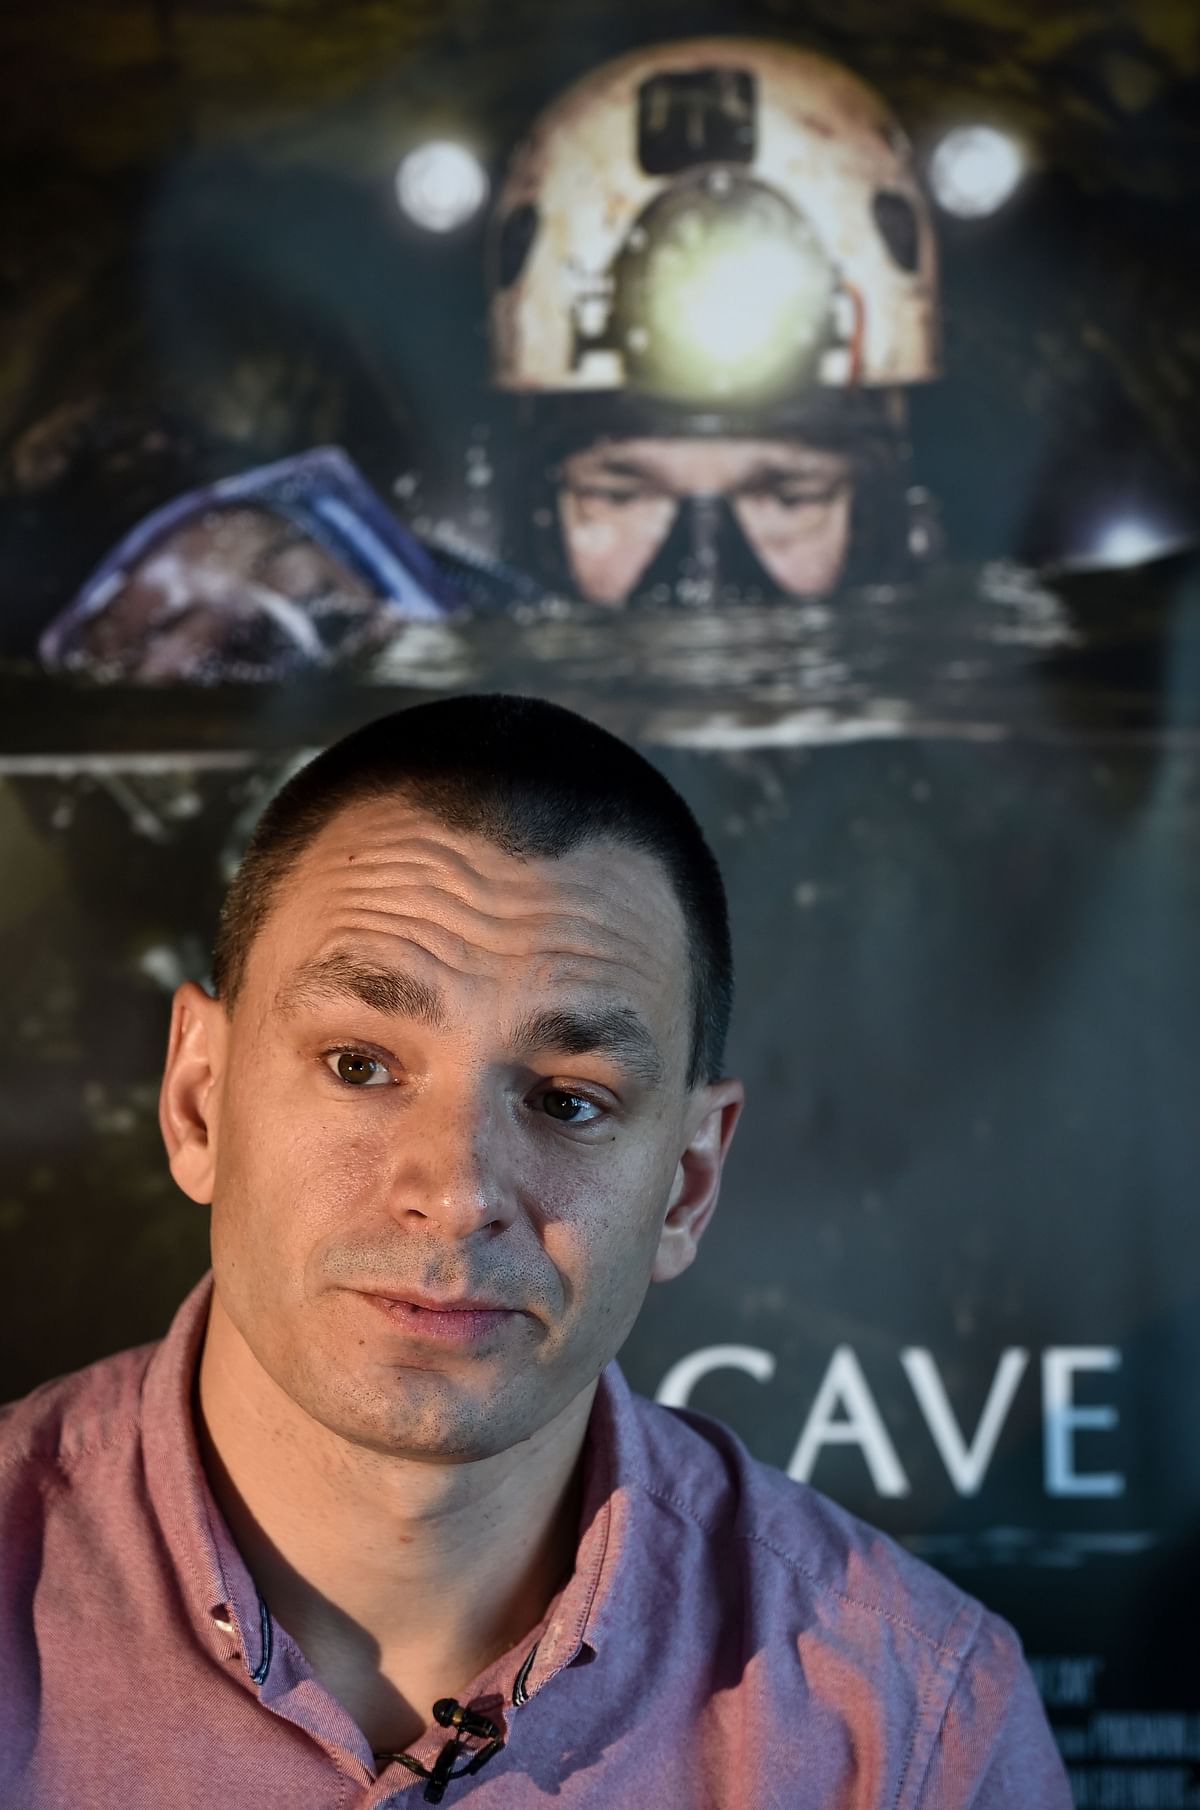 This photo taken on 1 October 2019 shows Belgian diver Jim Warny, who took part in the Thai cave rescue mission in 2018, speaking during an interview in Bangkok. Photo: AFP